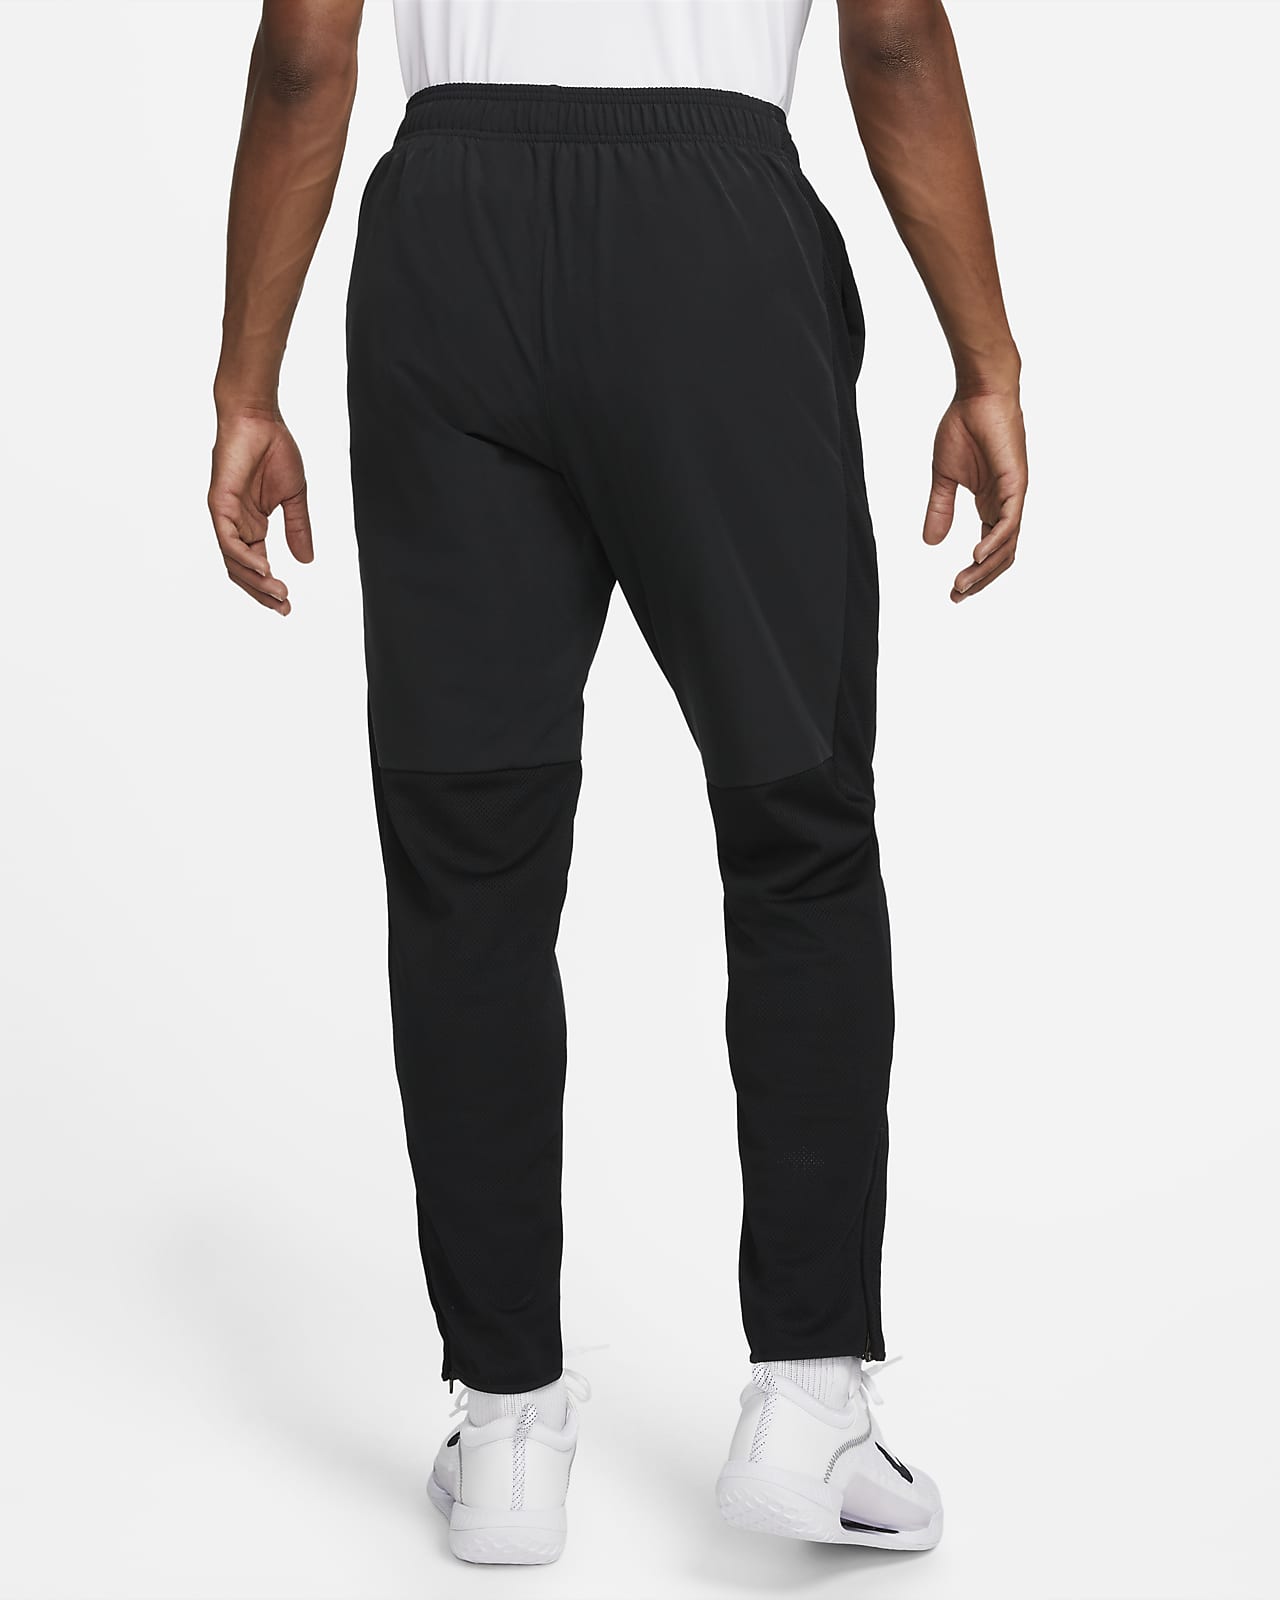 TENNIS TROUSERS